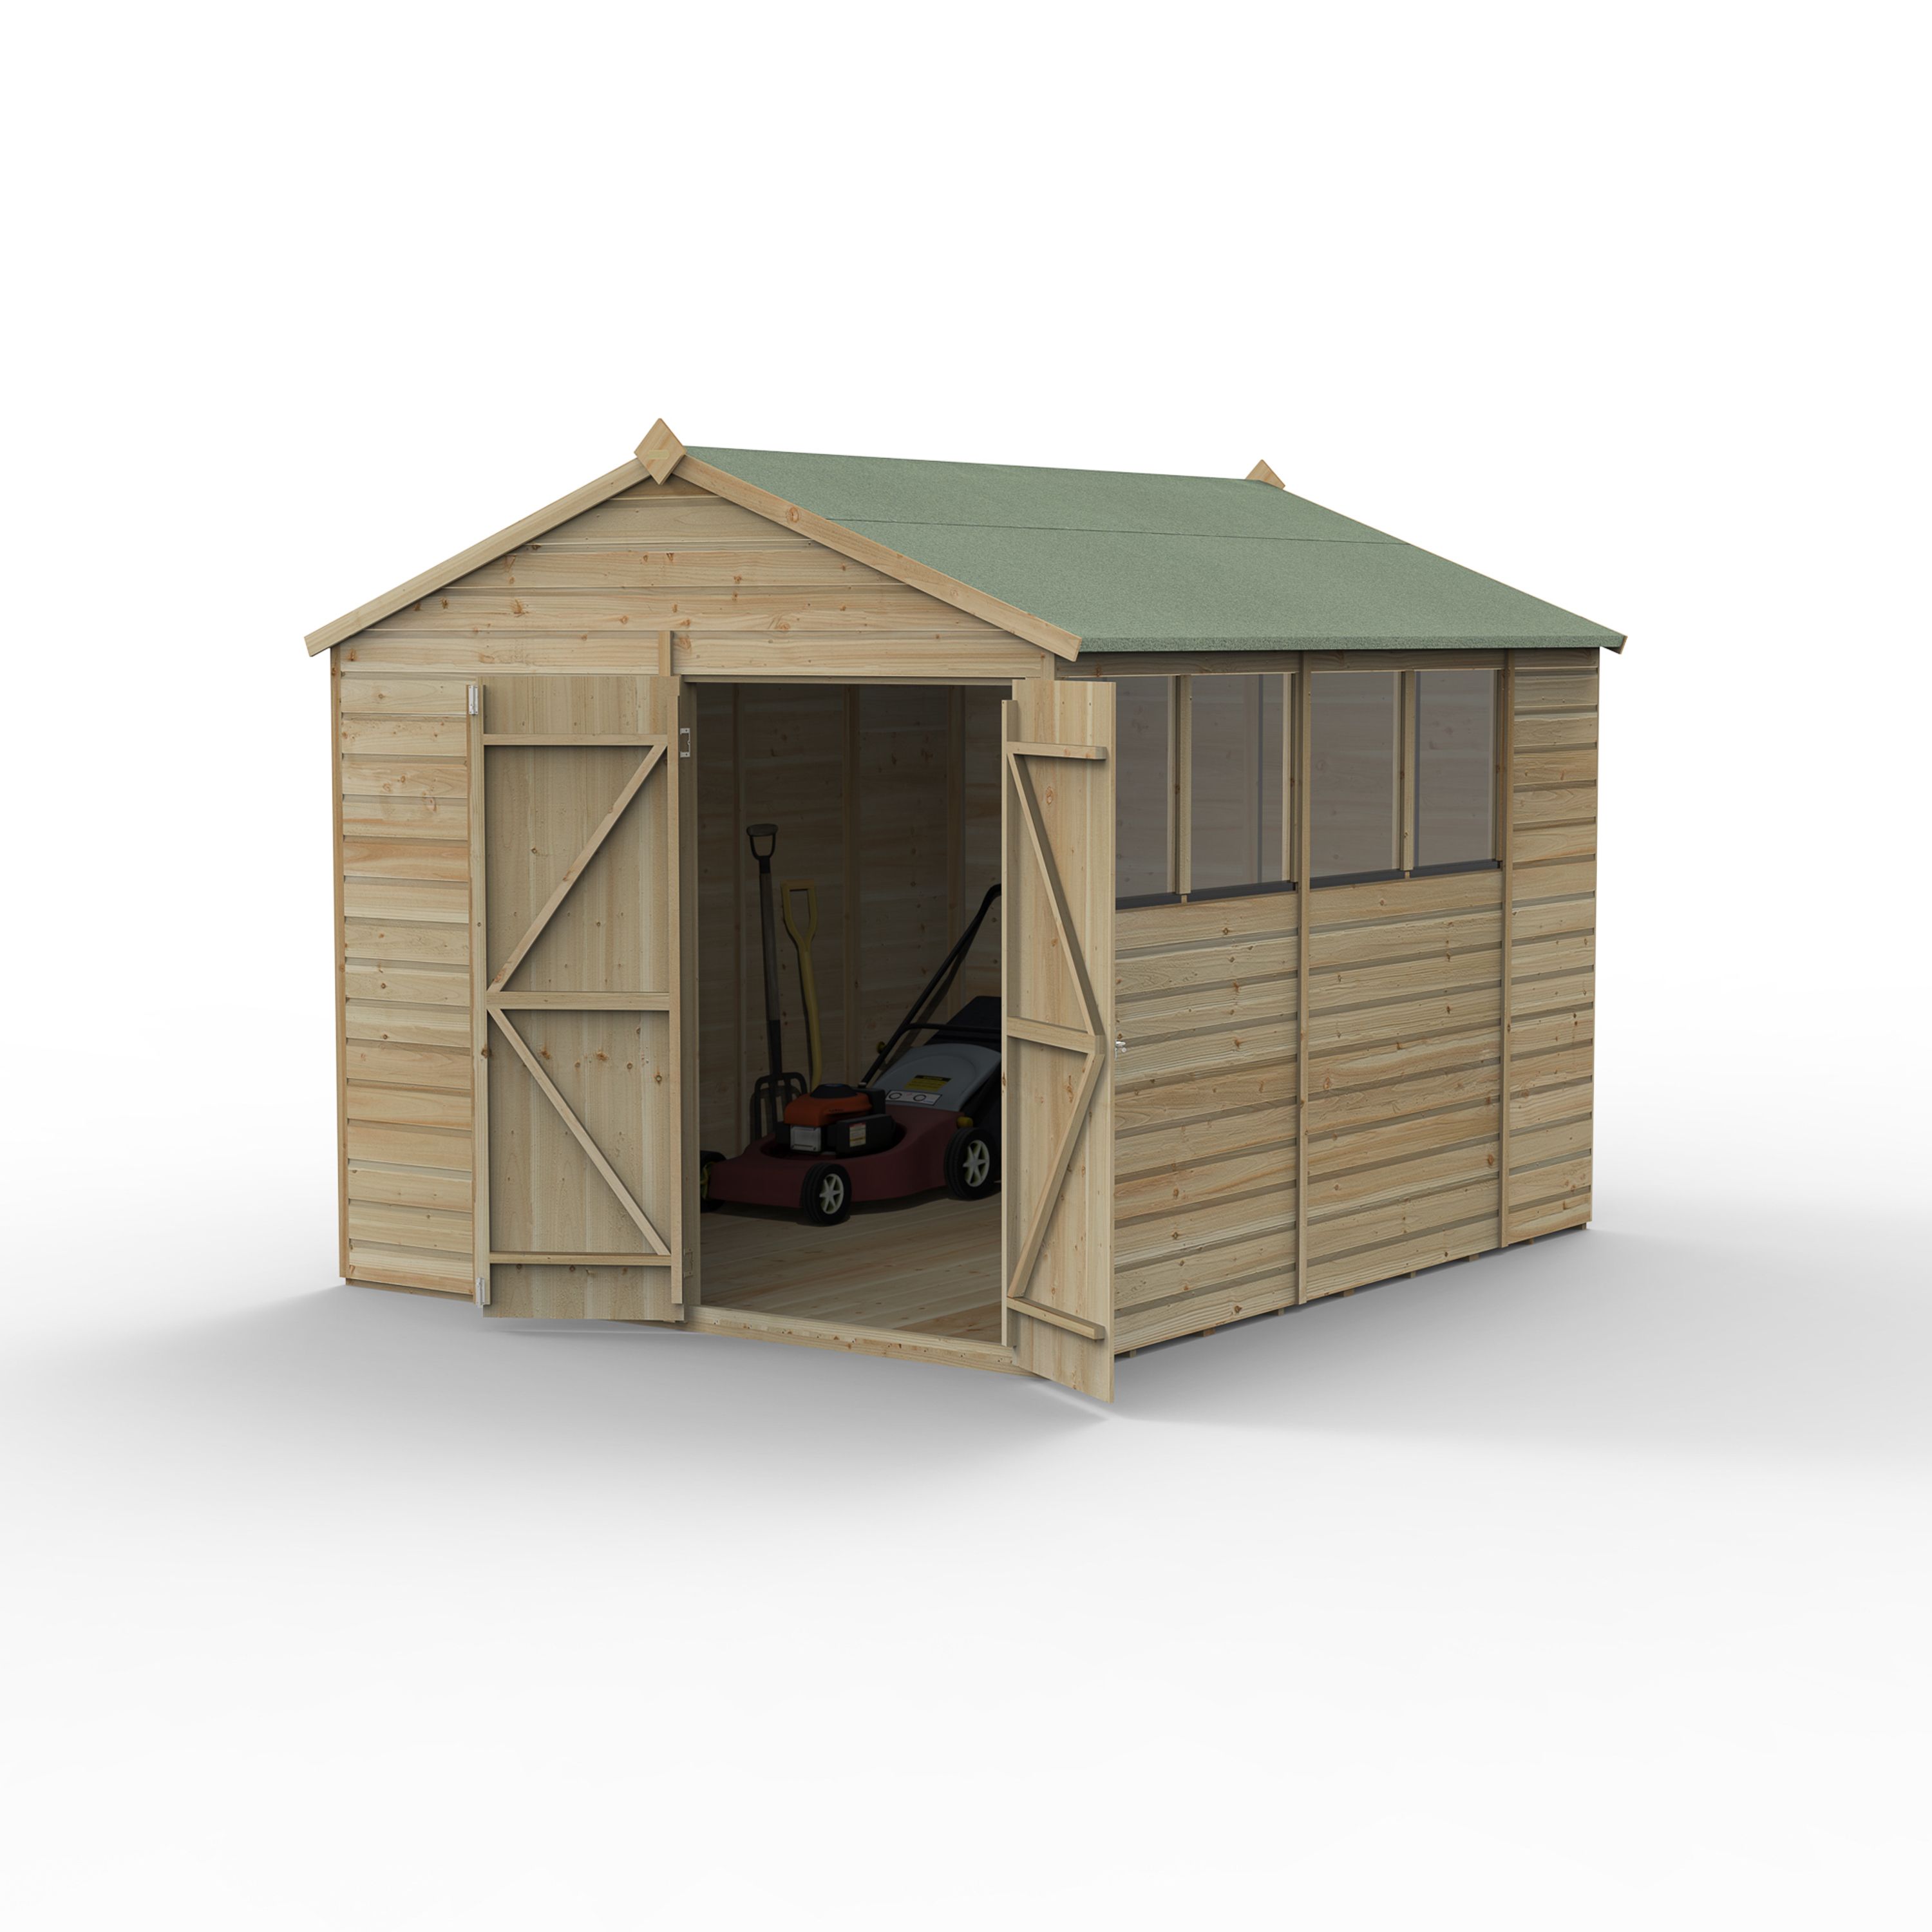 Forest Garden Beckwood 10x8 ft Apex Natural timber Wooden 2 door Shed with floor & 4 windows (Base included) - Assembly not required